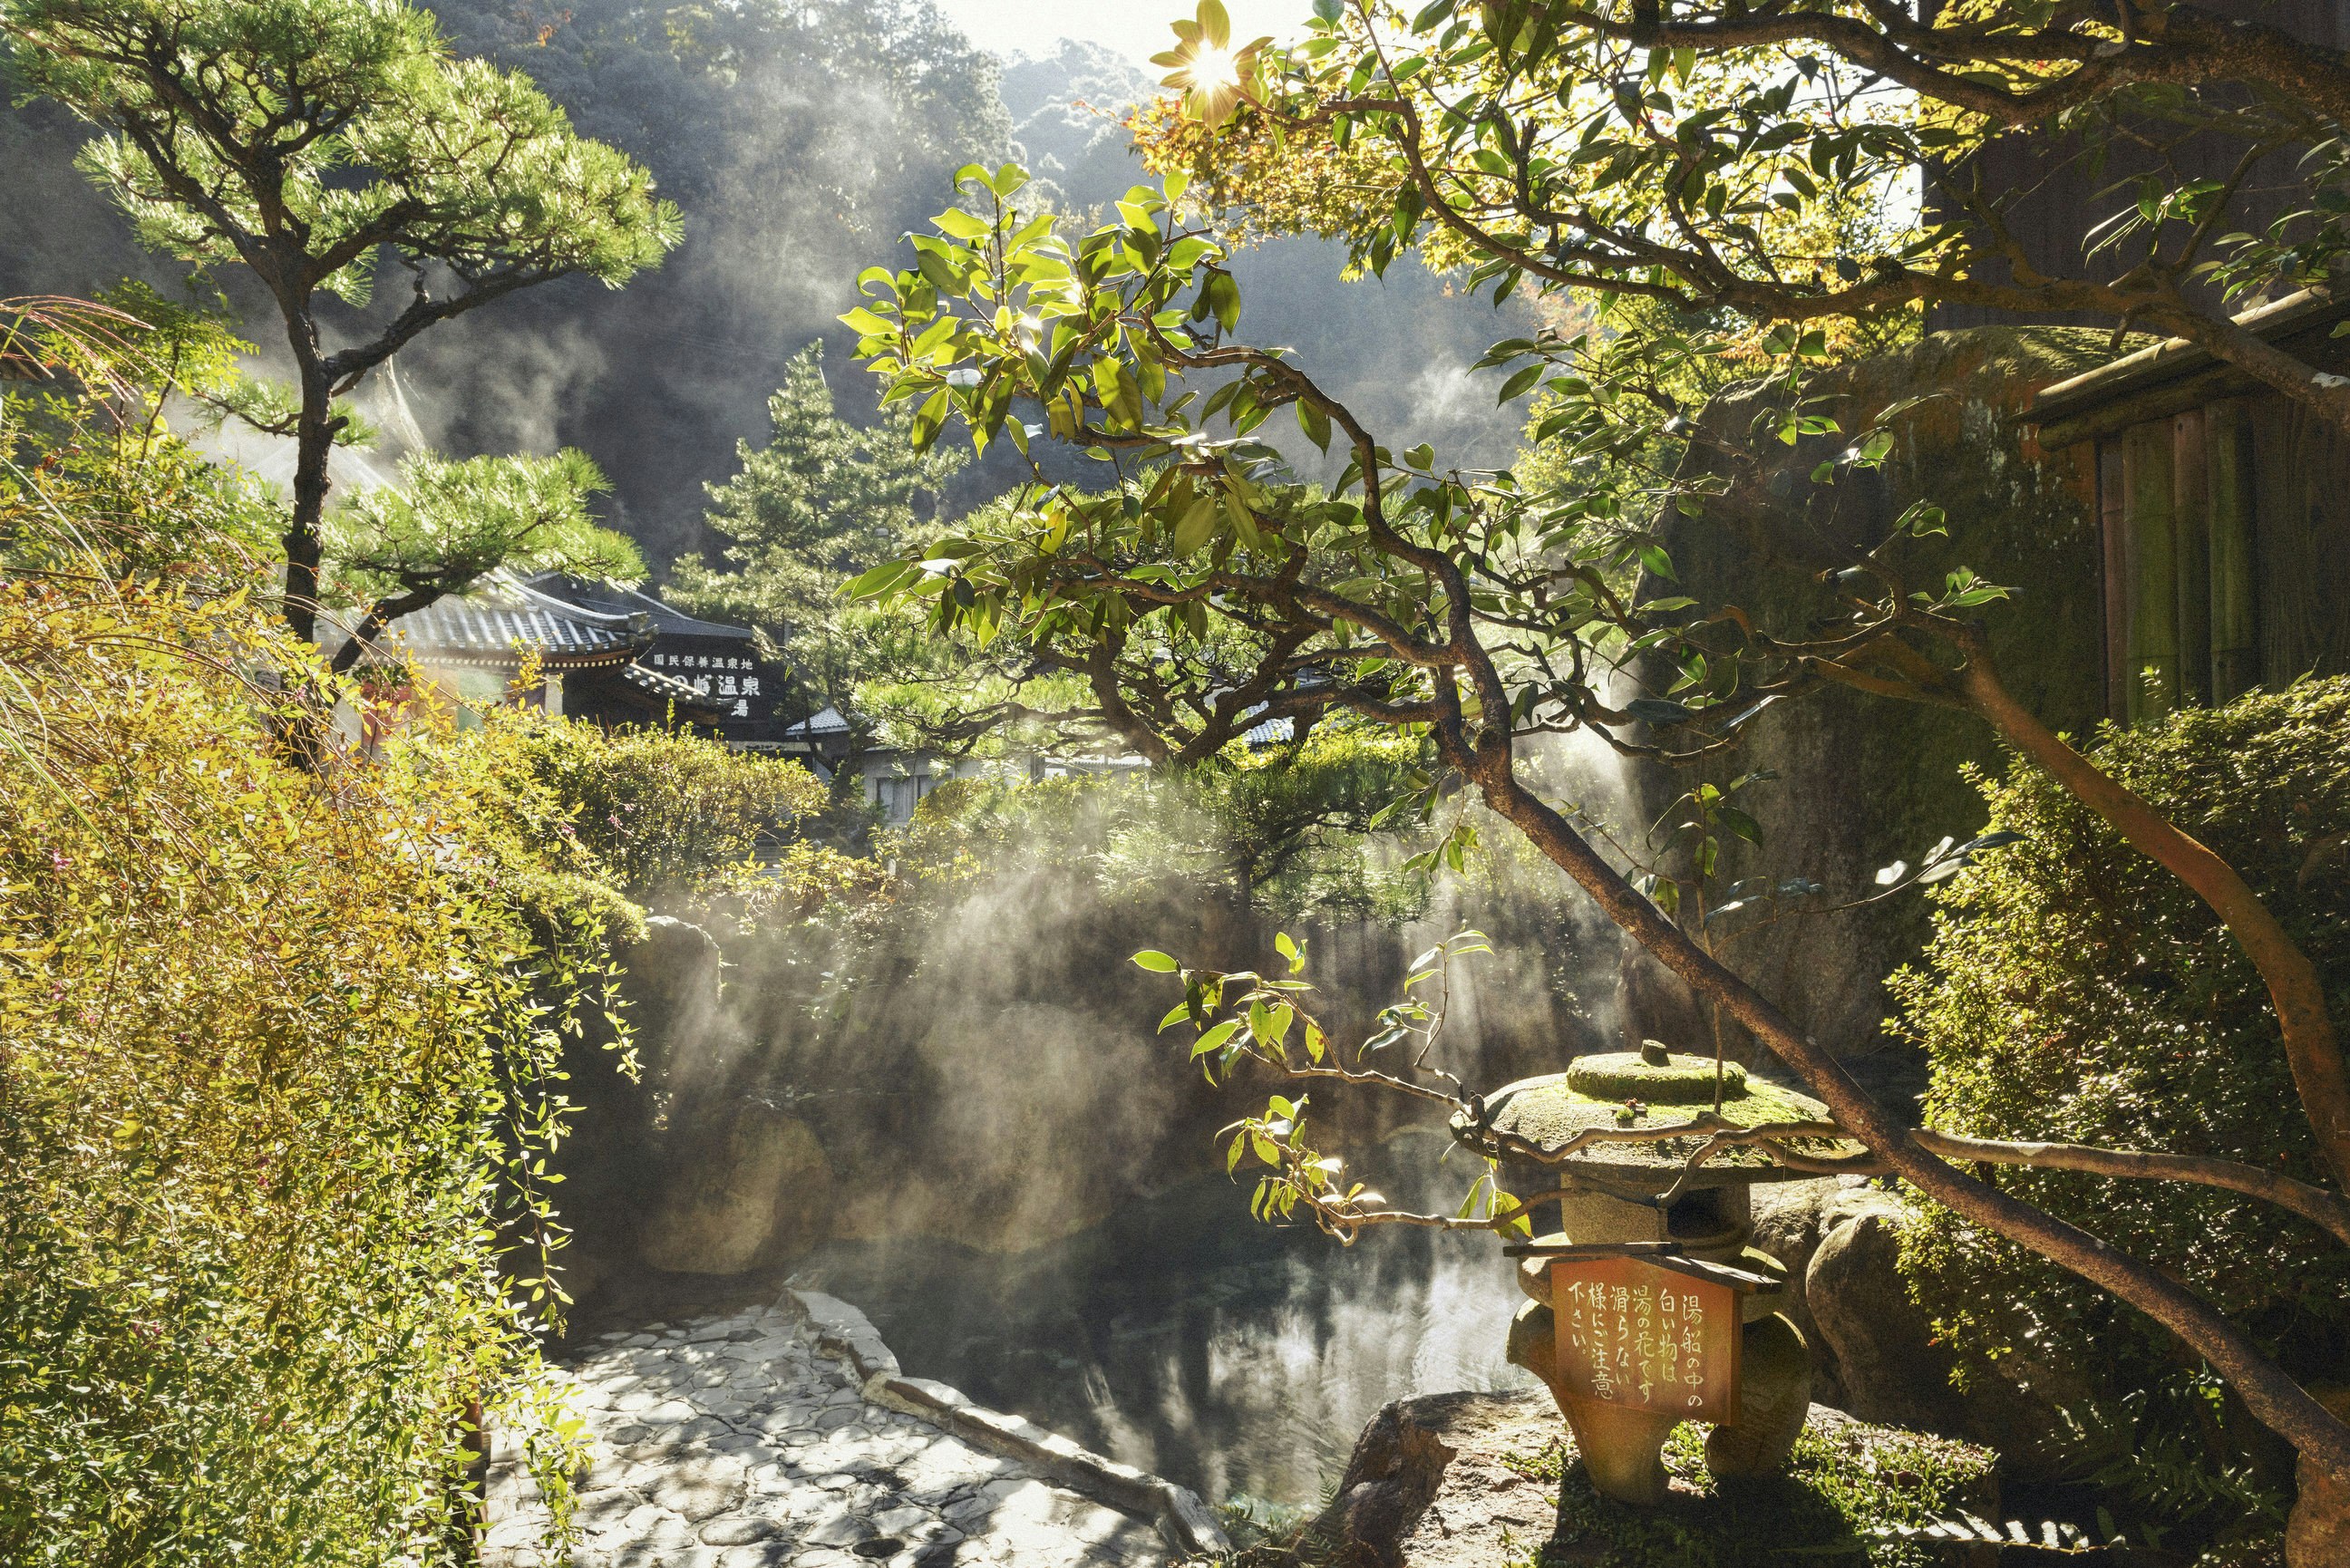 An outdoor onsen in Yunomine surrounded by green trees and foliage